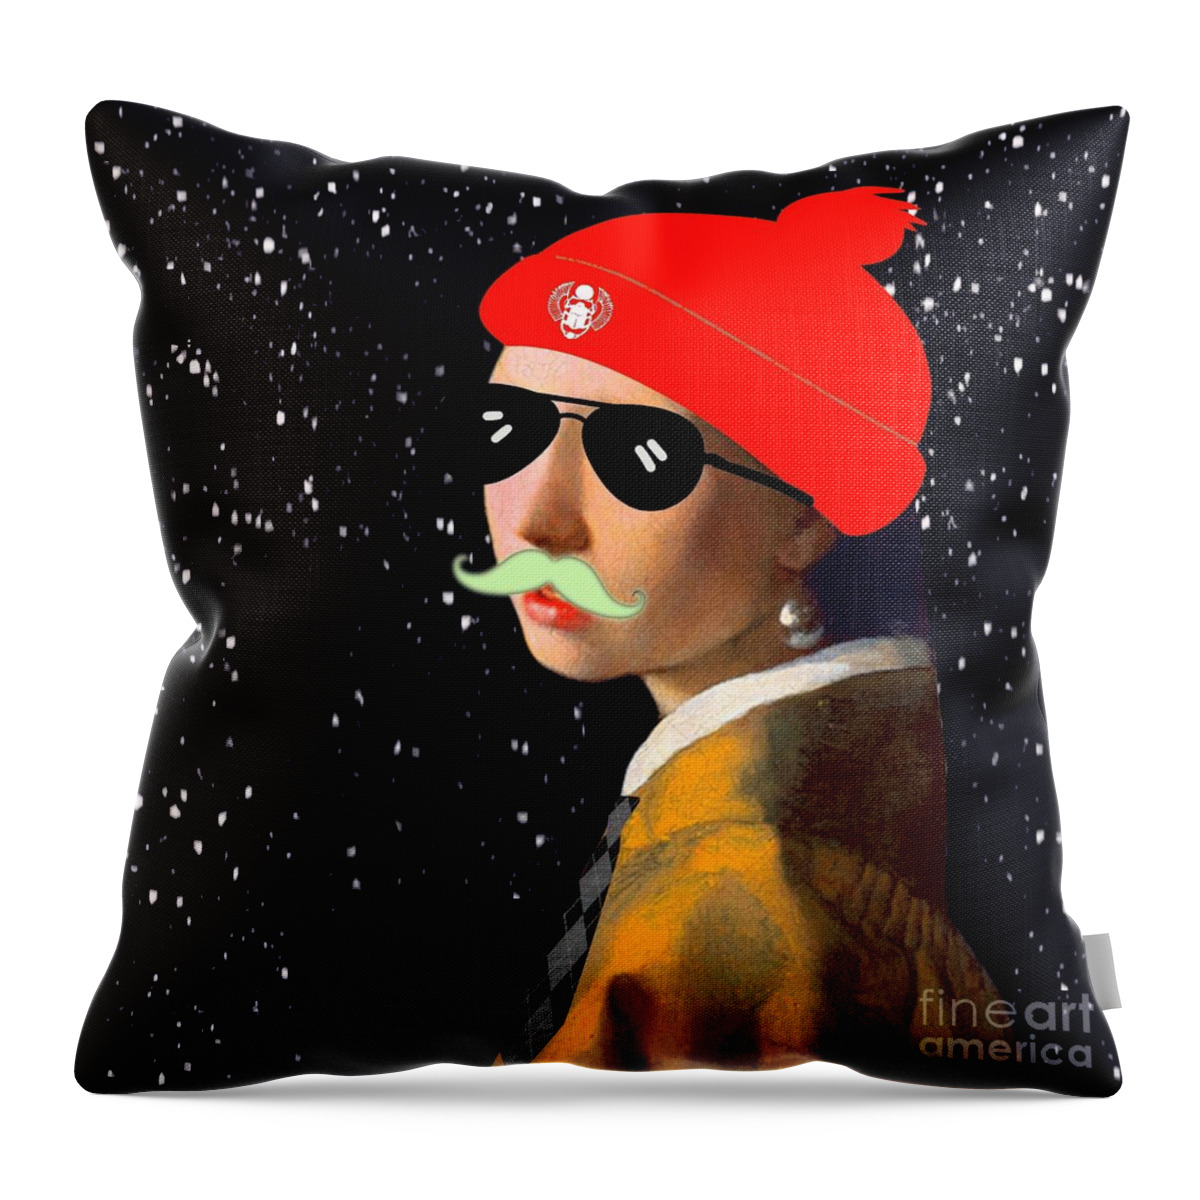 Girlwithapearlearring Throw Pillow featuring the digital art Gpe #23 by HELGE Art Gallery